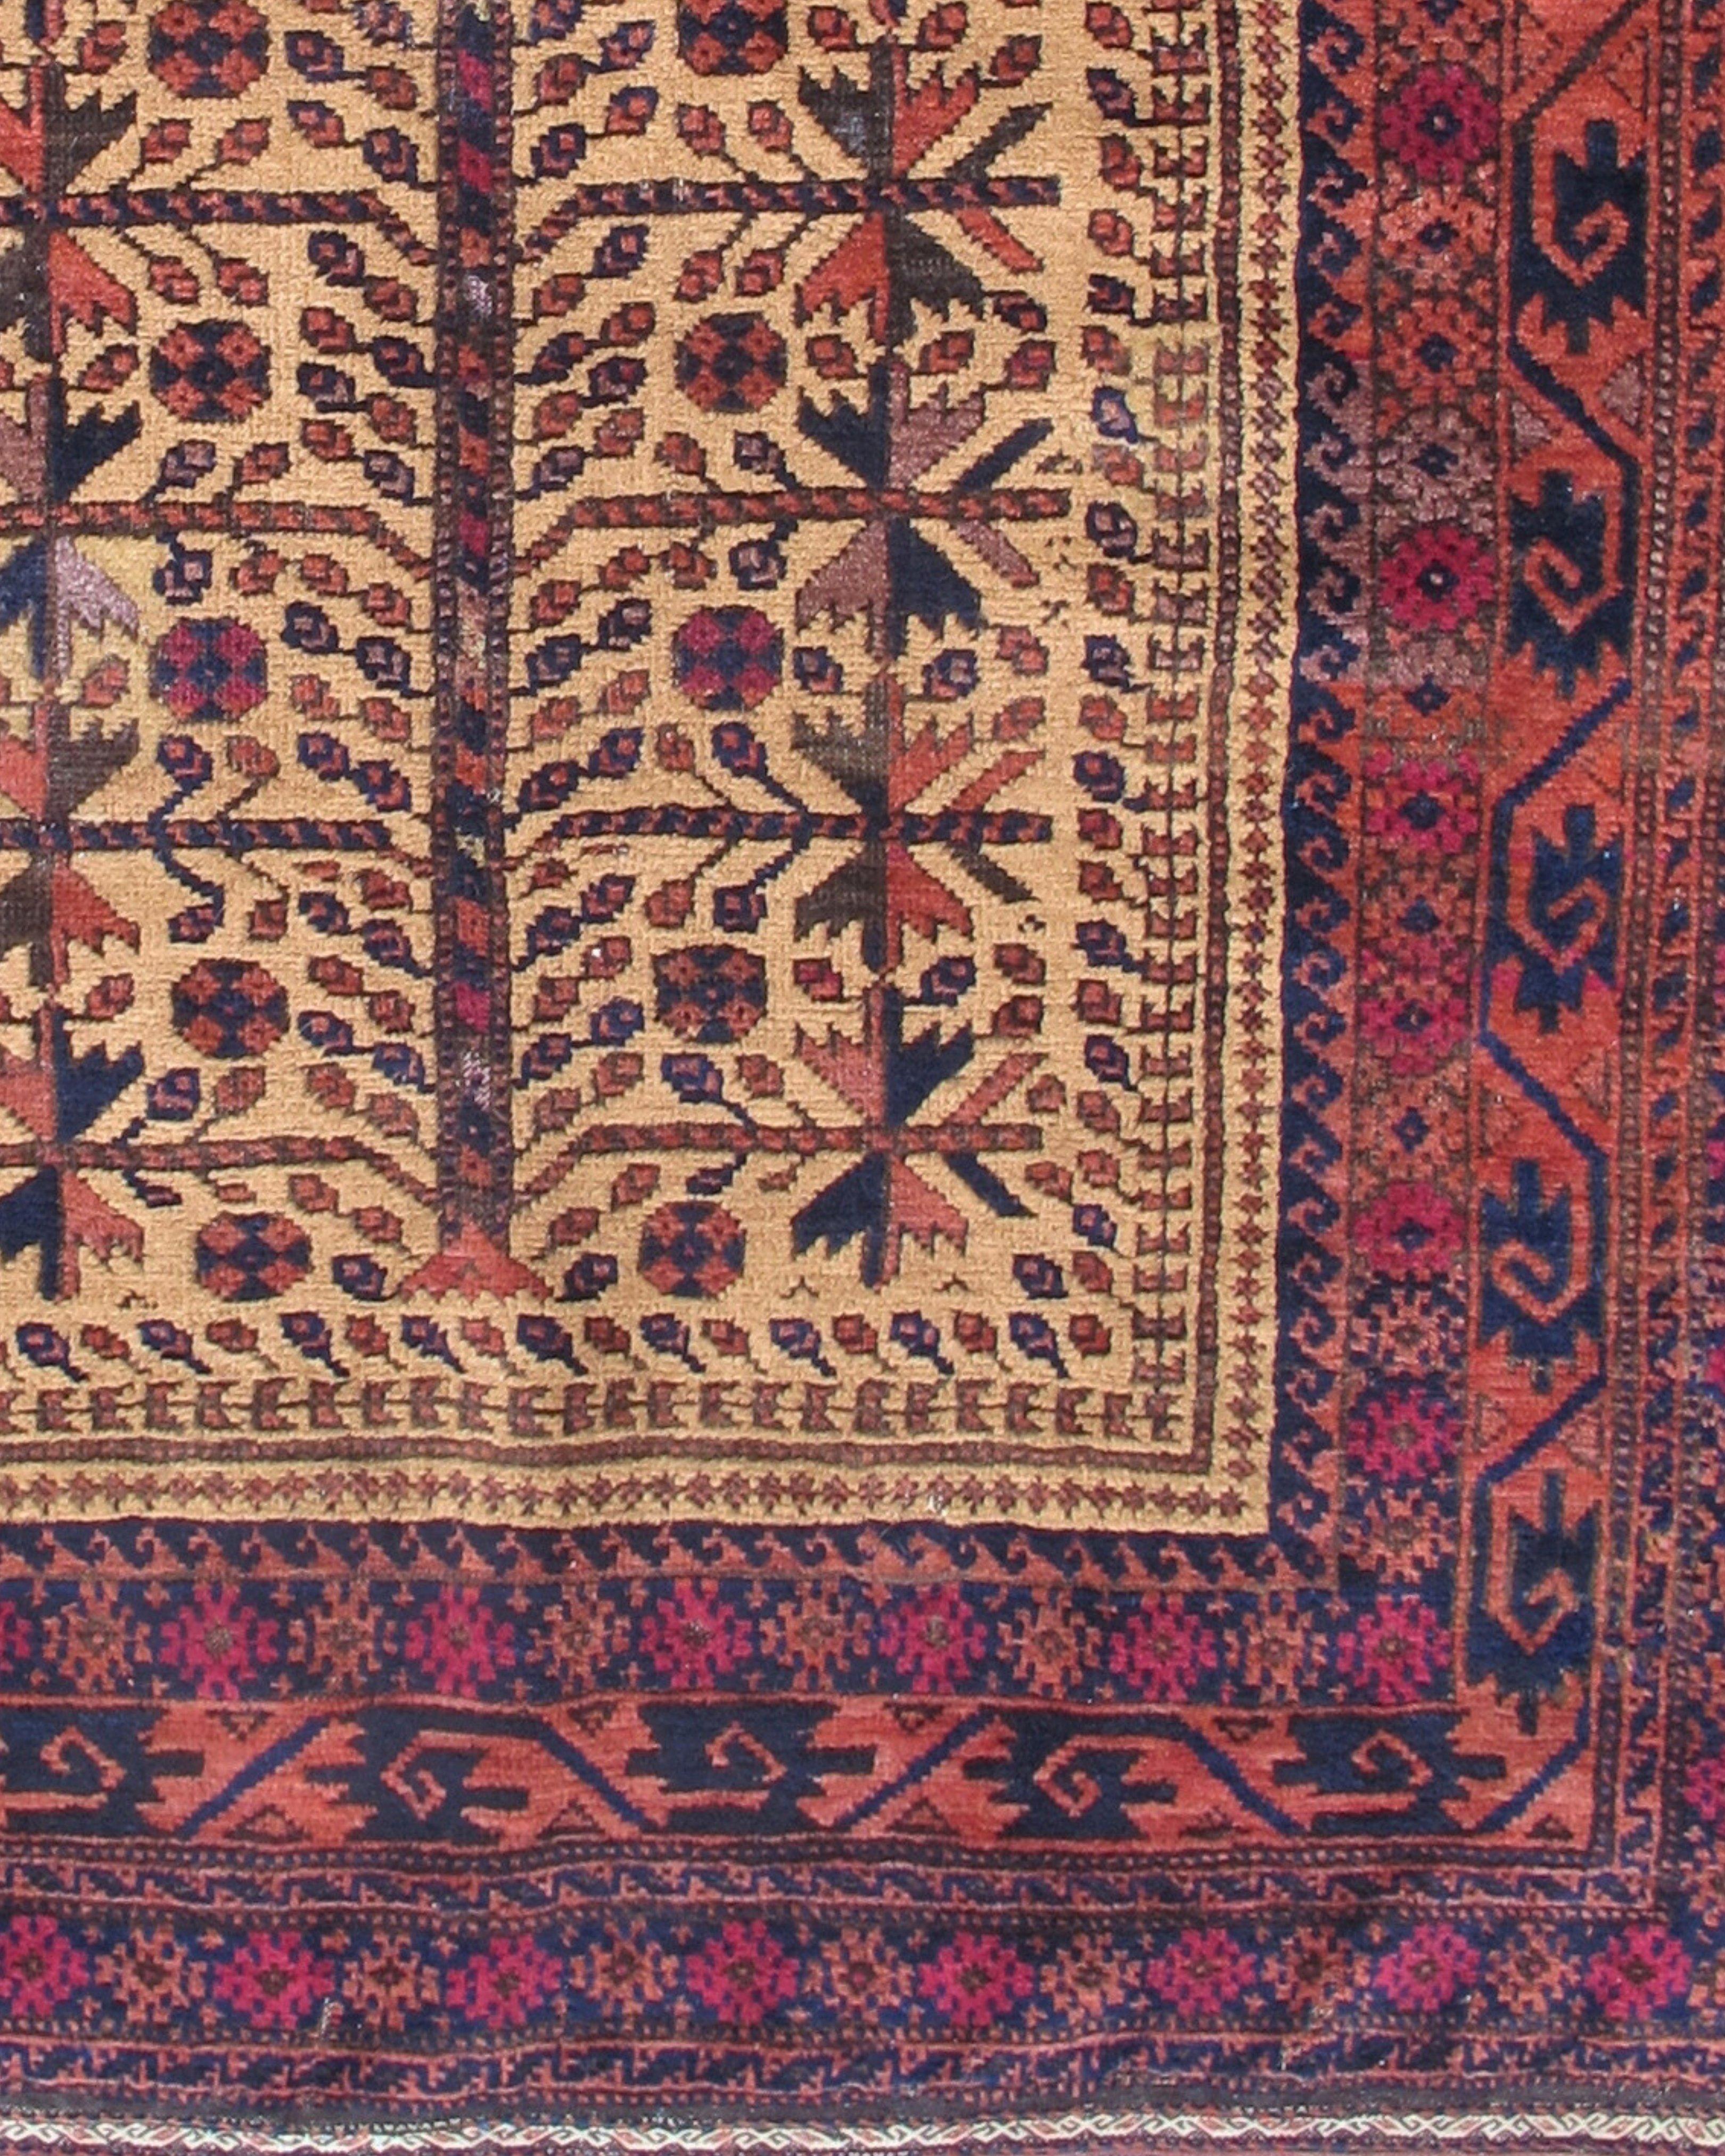 Wool Antique Persian Baluch Prayer Rug, c. 1900 For Sale